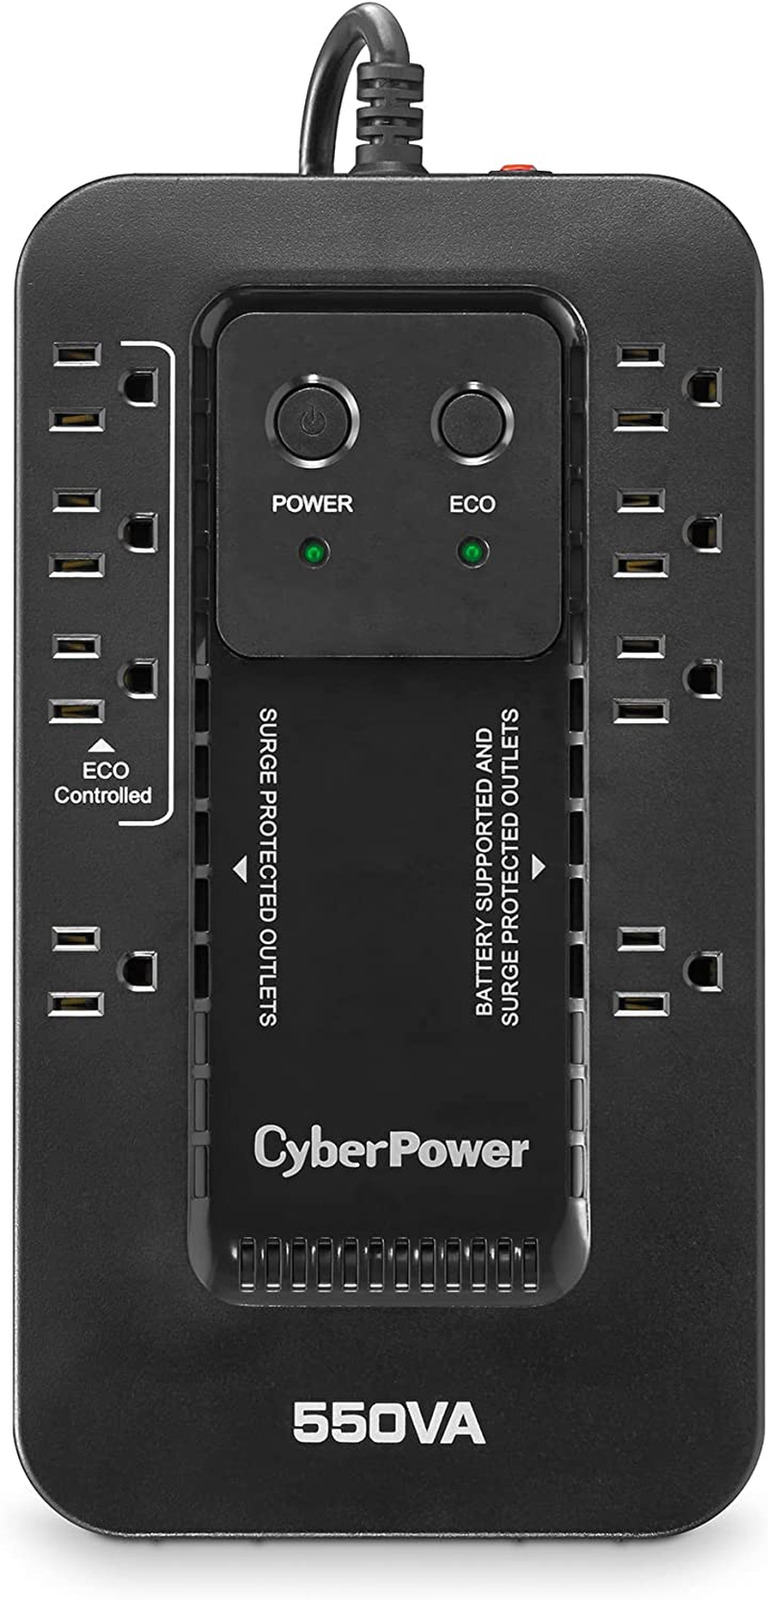 Cyberpower EC550G Ecologic Battery Backup & Surge Protector UPS System, 550VA/33